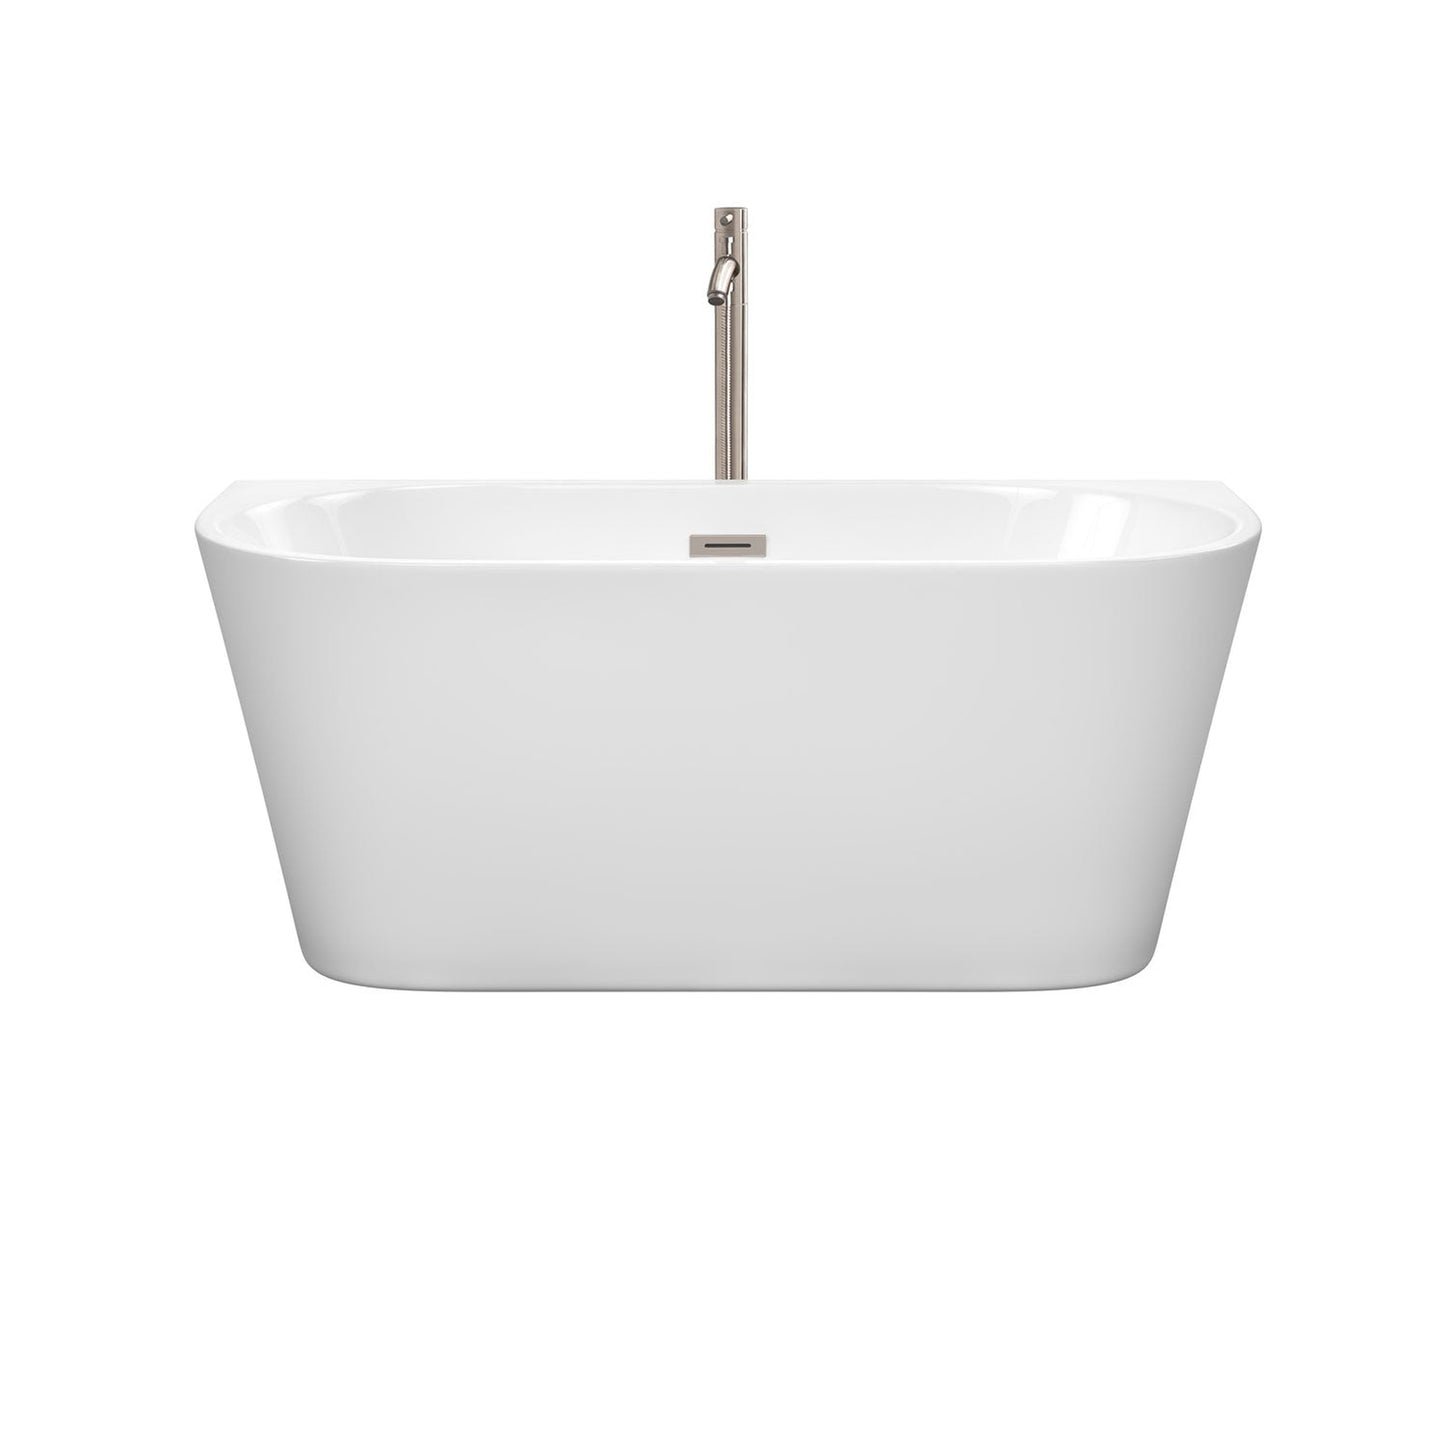 Wyndham Collection Callie 59" Freestanding Bathtub in White With Floor Mounted Faucet, Drain and Overflow Trim in Brushed Nickel